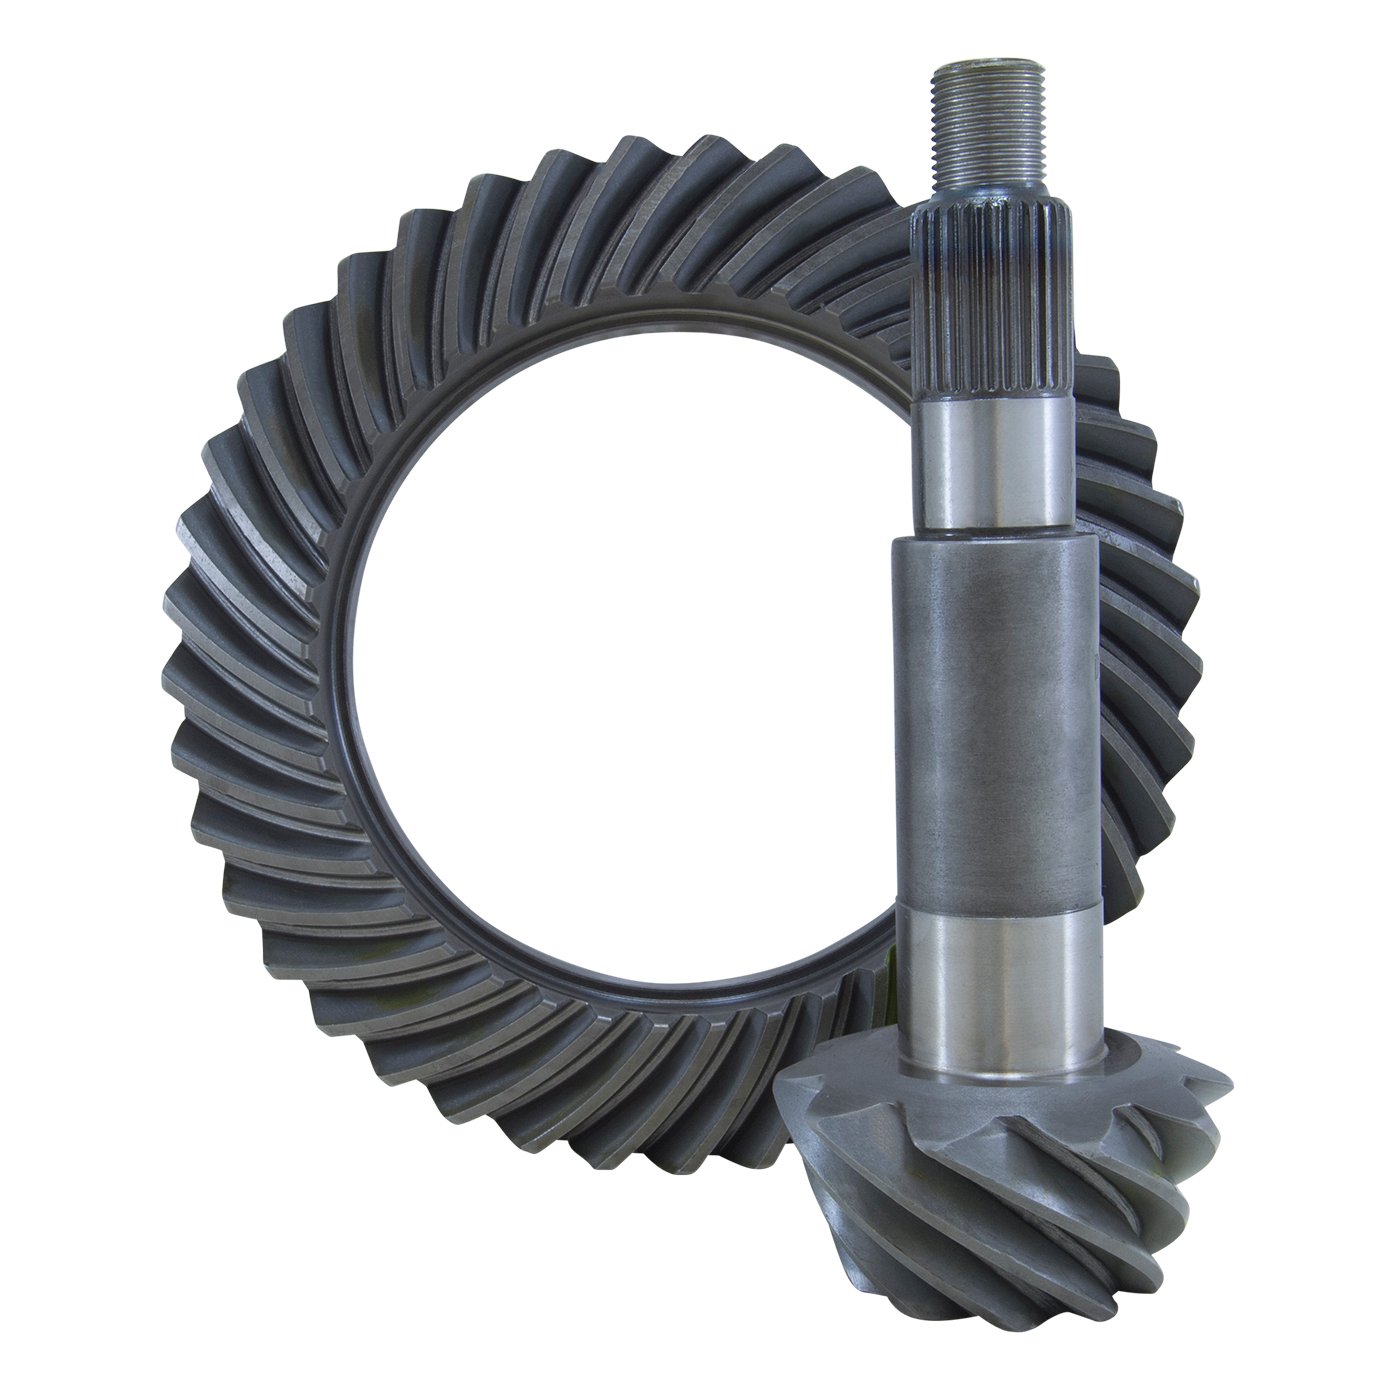 USA Standard ZG D60-411 Replacement Ring & Pinion Gear Set, For Dana 60, 4.11 Ratio